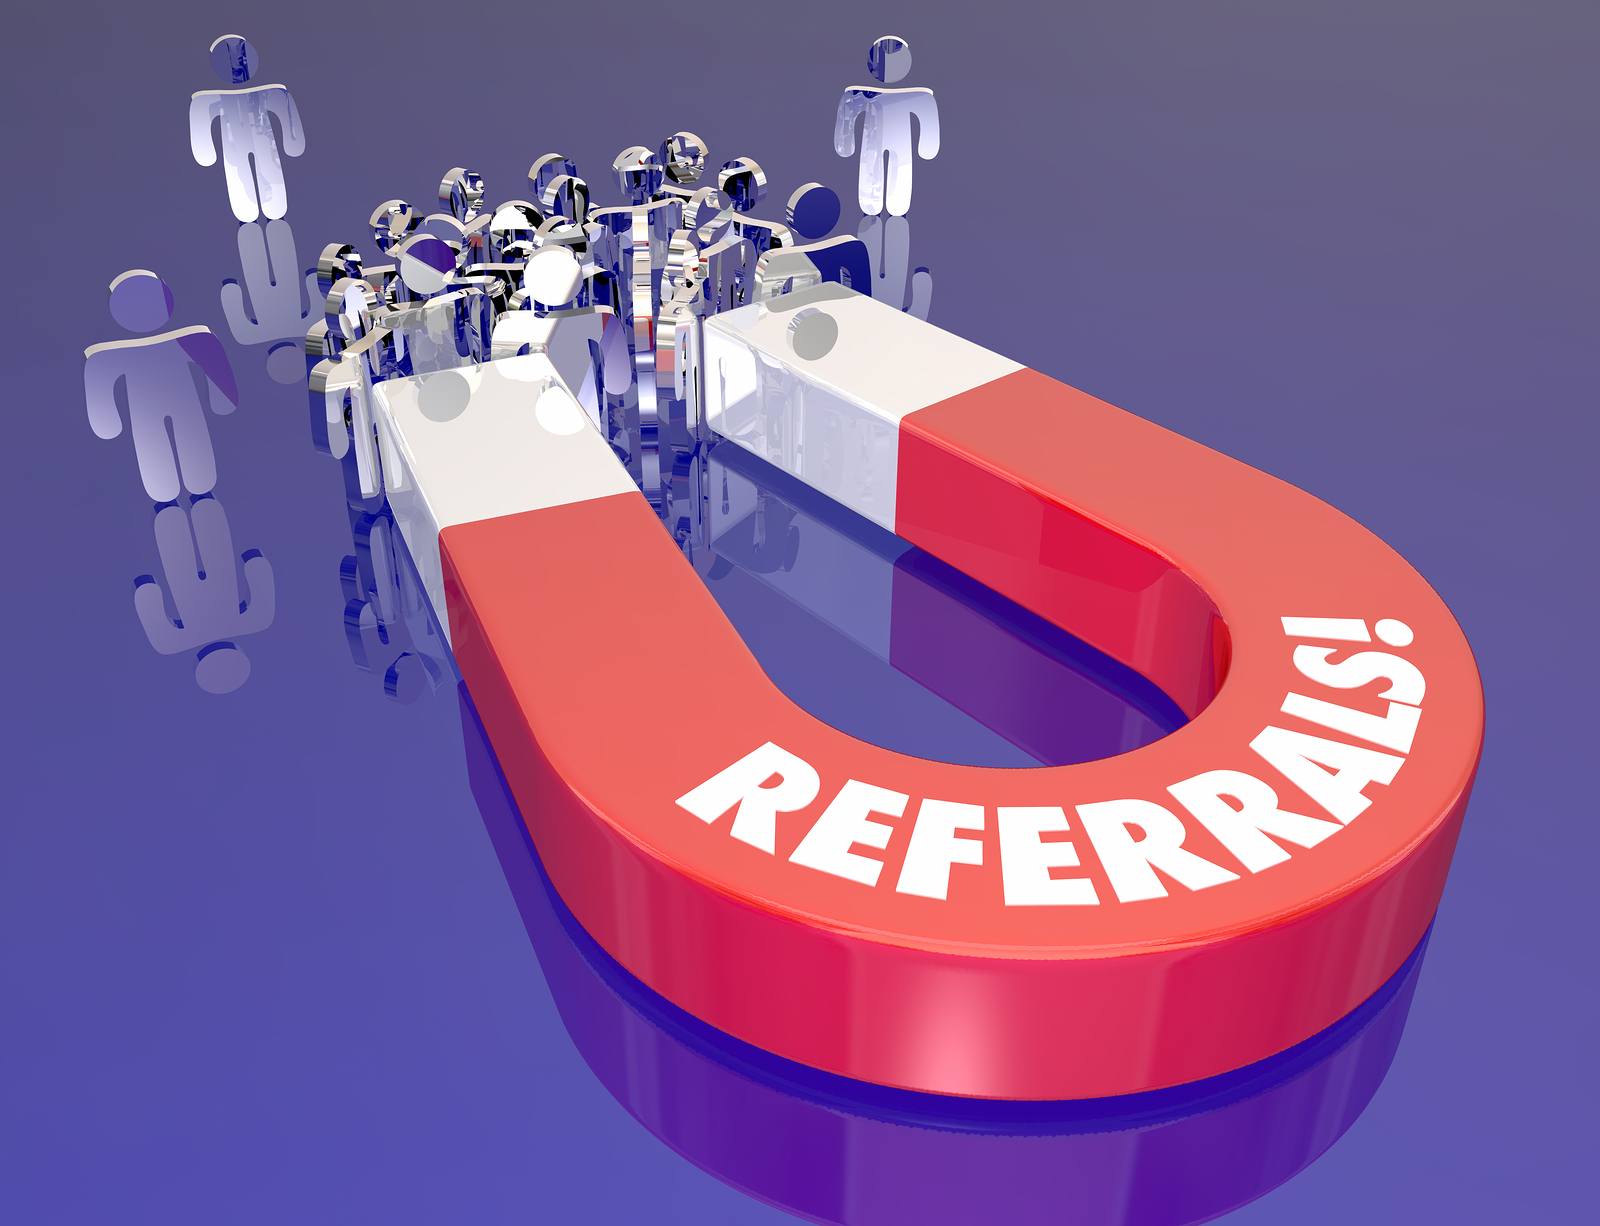 How To Increase Your Law Firm’s Number Of Referrals